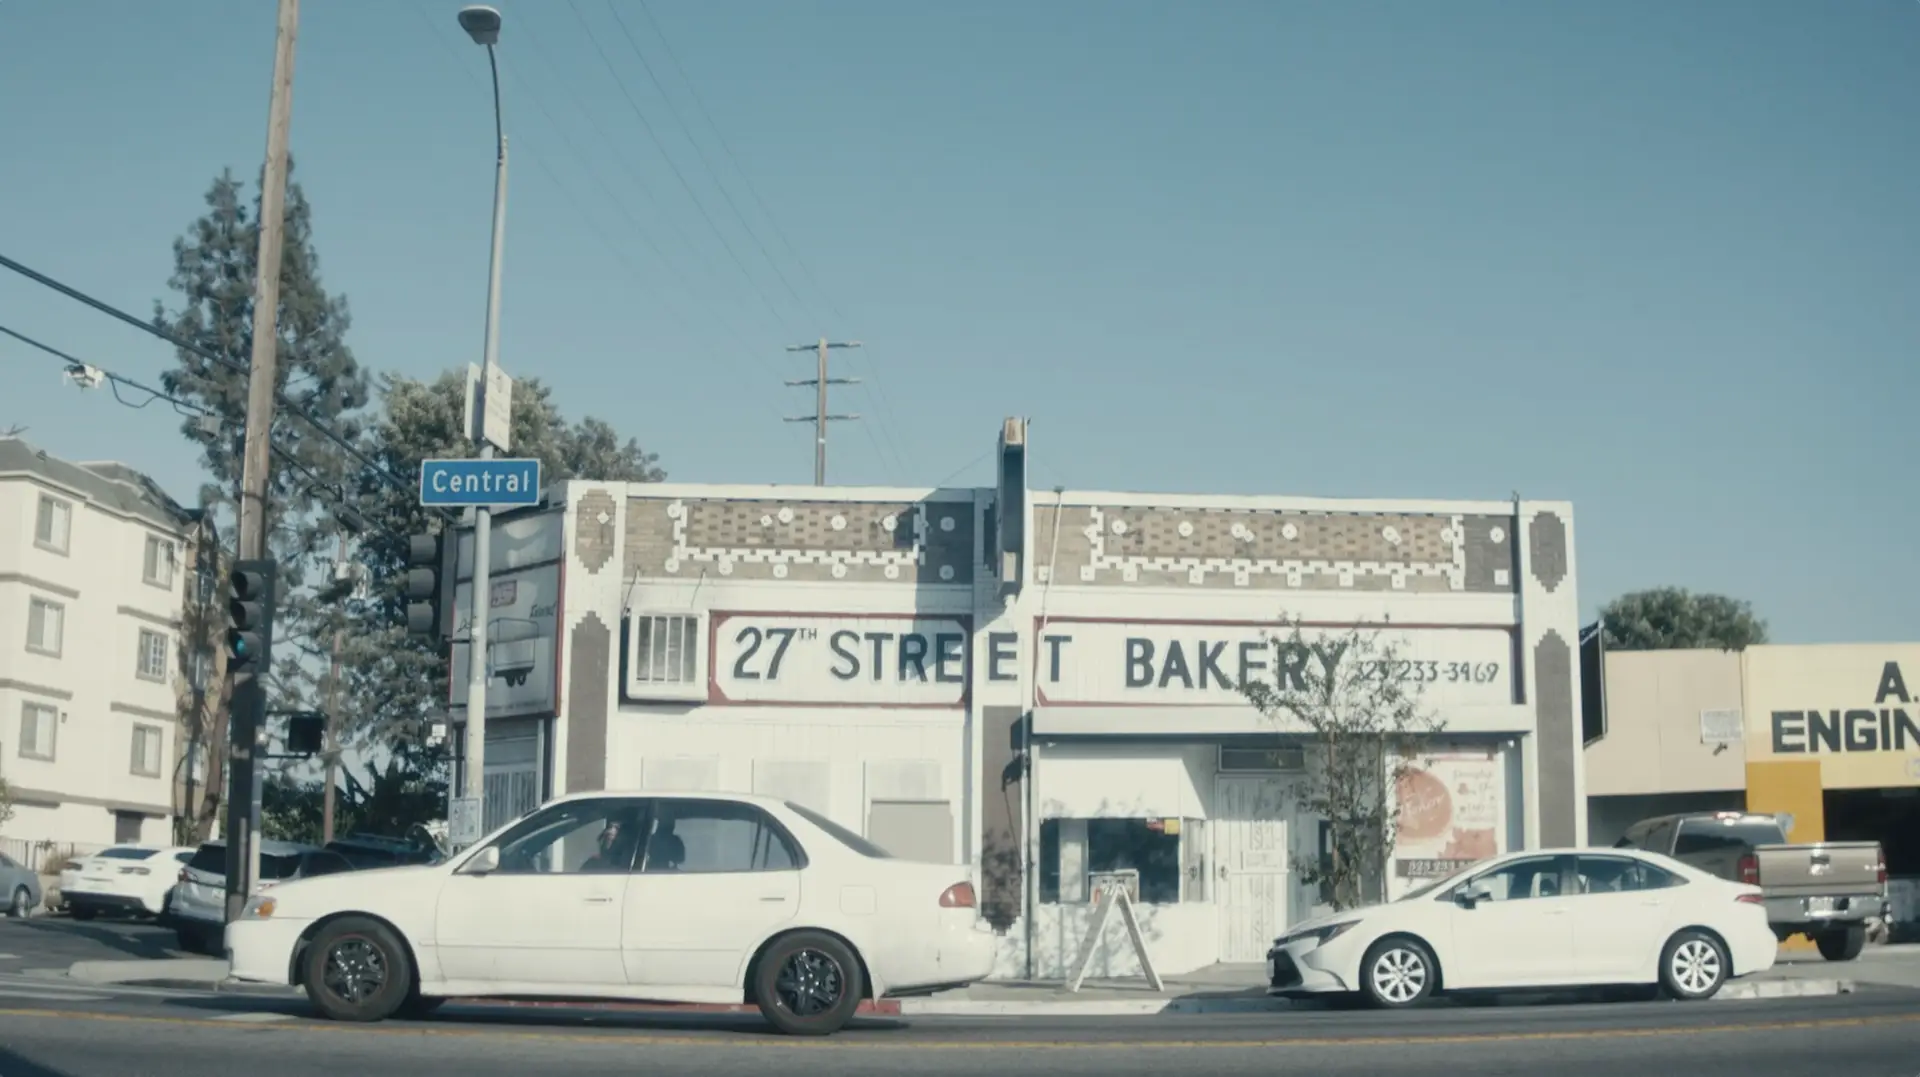 Two cars are parked in front of a bakery, their purchases empowered by grants from PayPal.